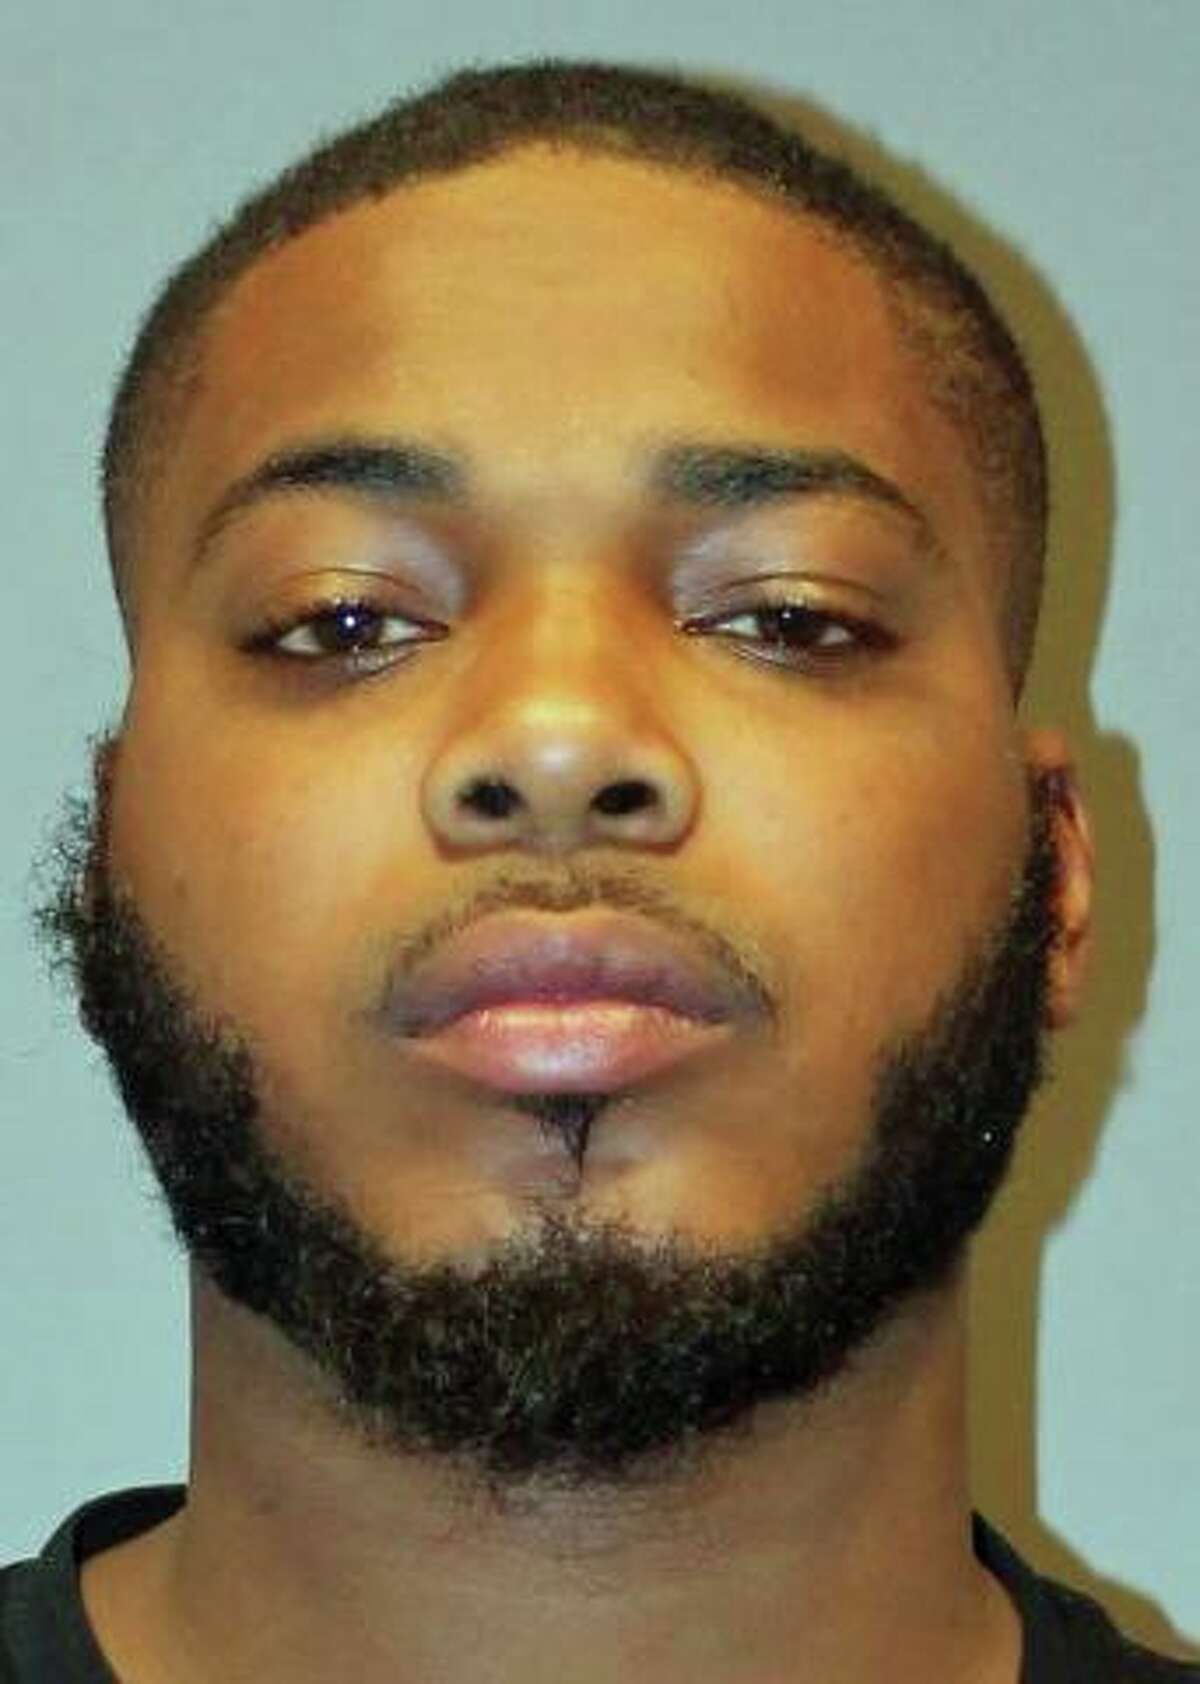 Brandyn Grant-Ford, of Stratford, was found not guilty in connection with the murder of Andre Pettway, 27, of Bridgeport, on Saturday, May 27, 2017.